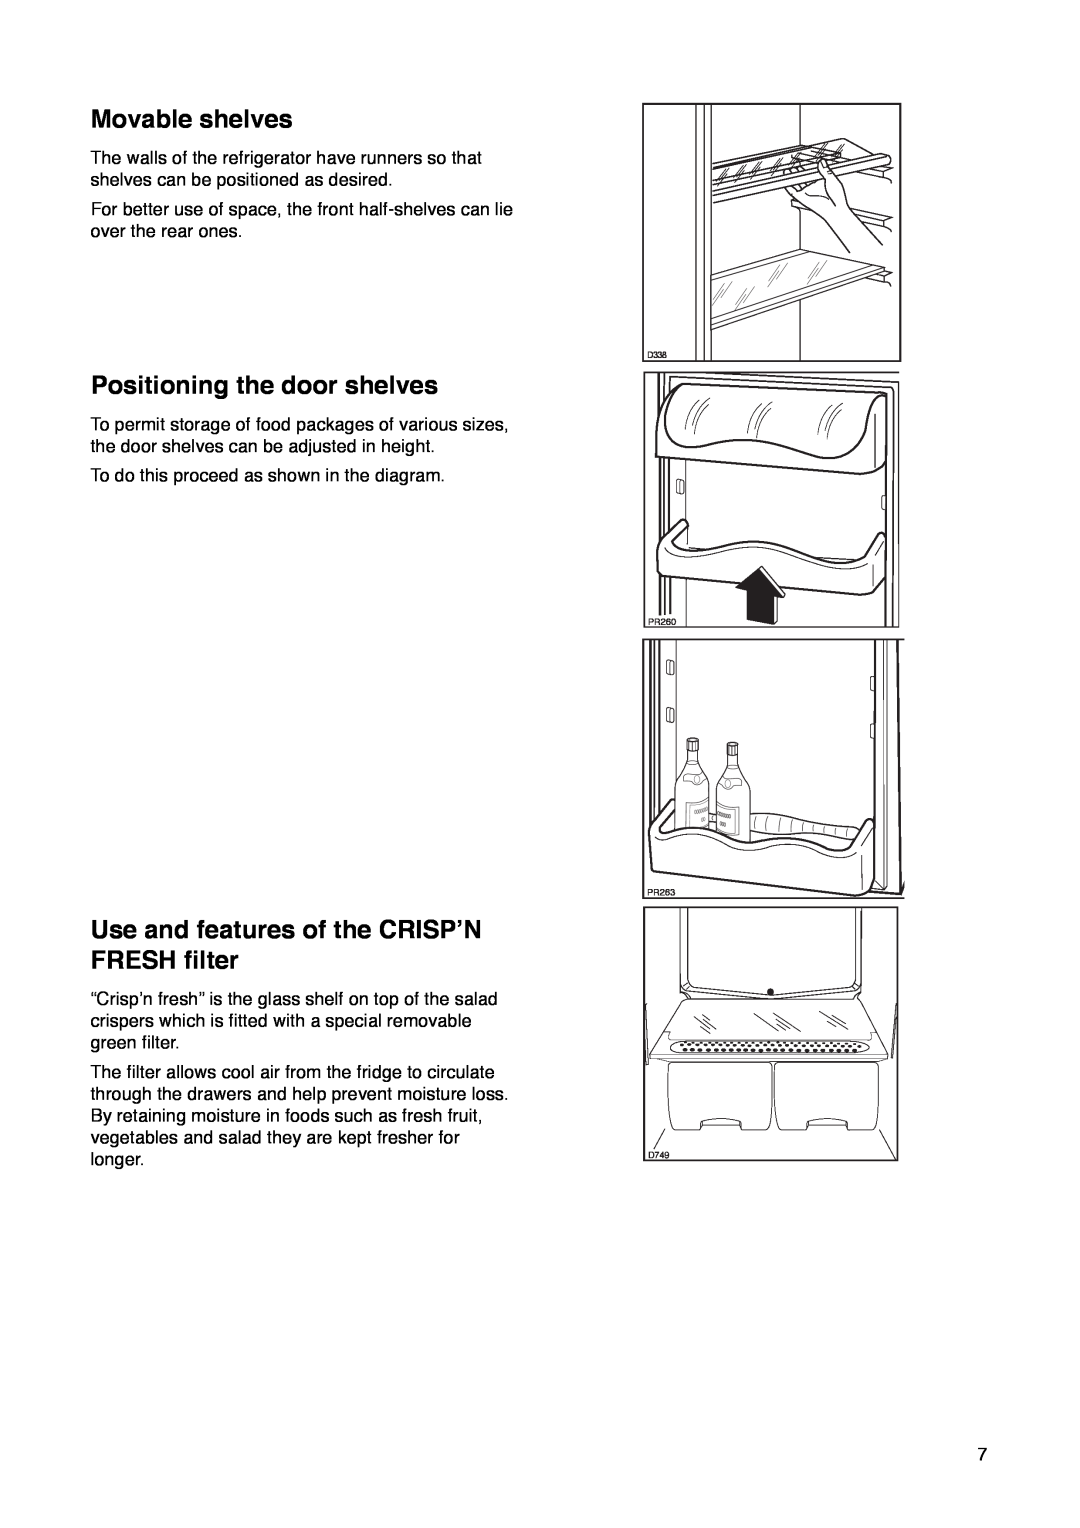 Zanussi ZKR 60/30 R manual Movable shelves, Positioning the door shelves, Use and features of the CRISPÕN FRESH filter 